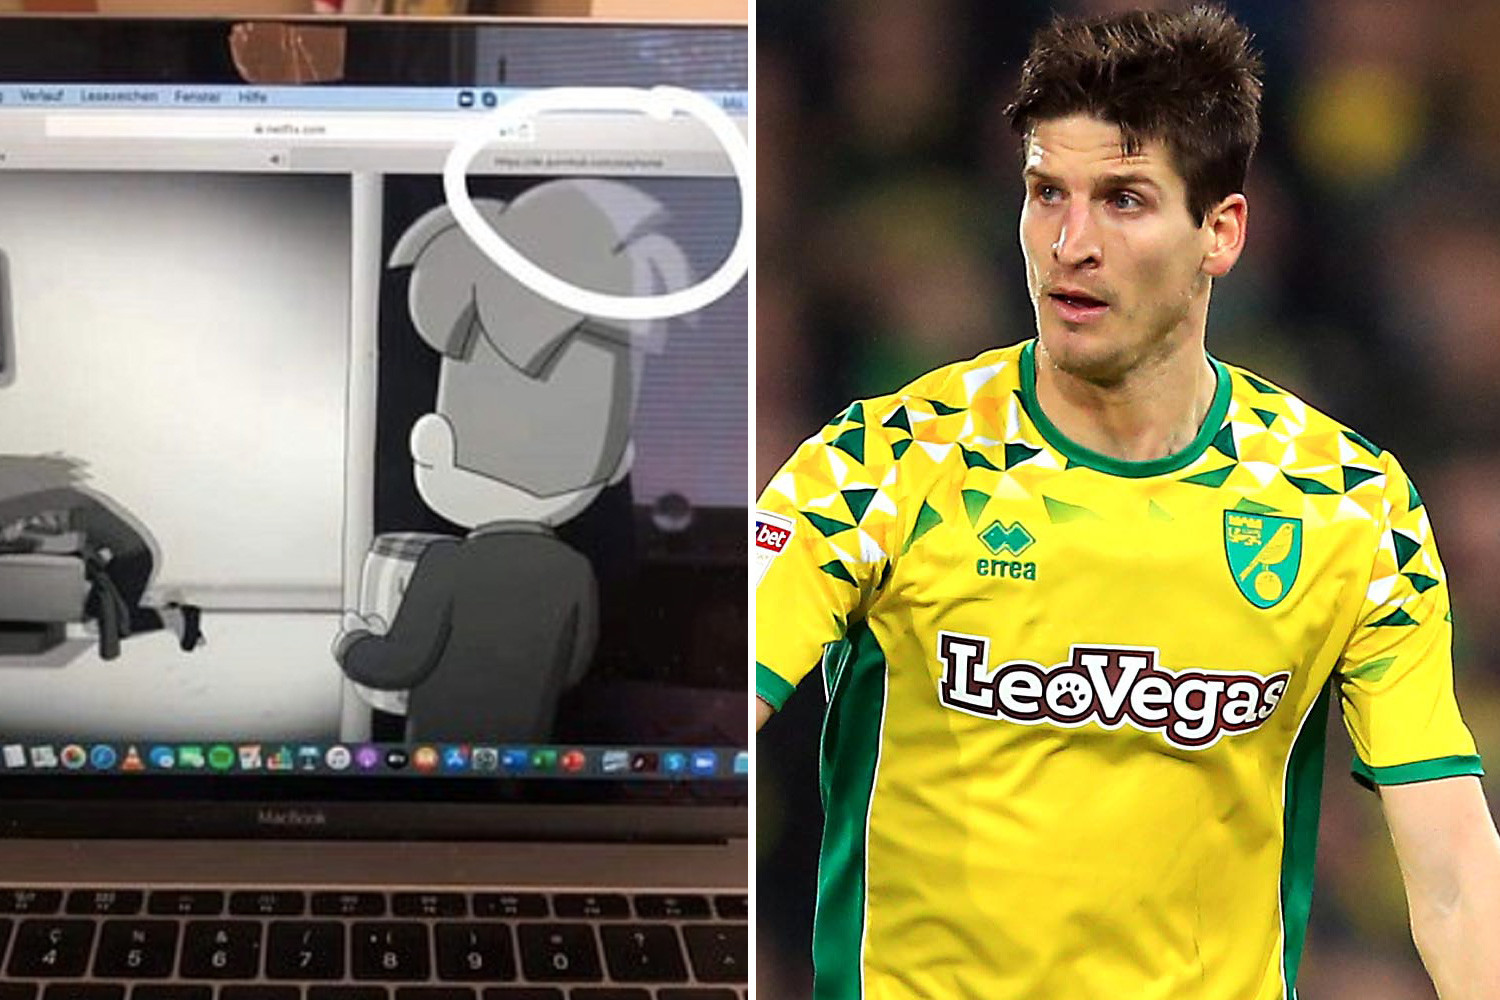 , Pornhub tab spotted open as Norwich star Timm Klose watches Netflix on his MacBook in Instagram story